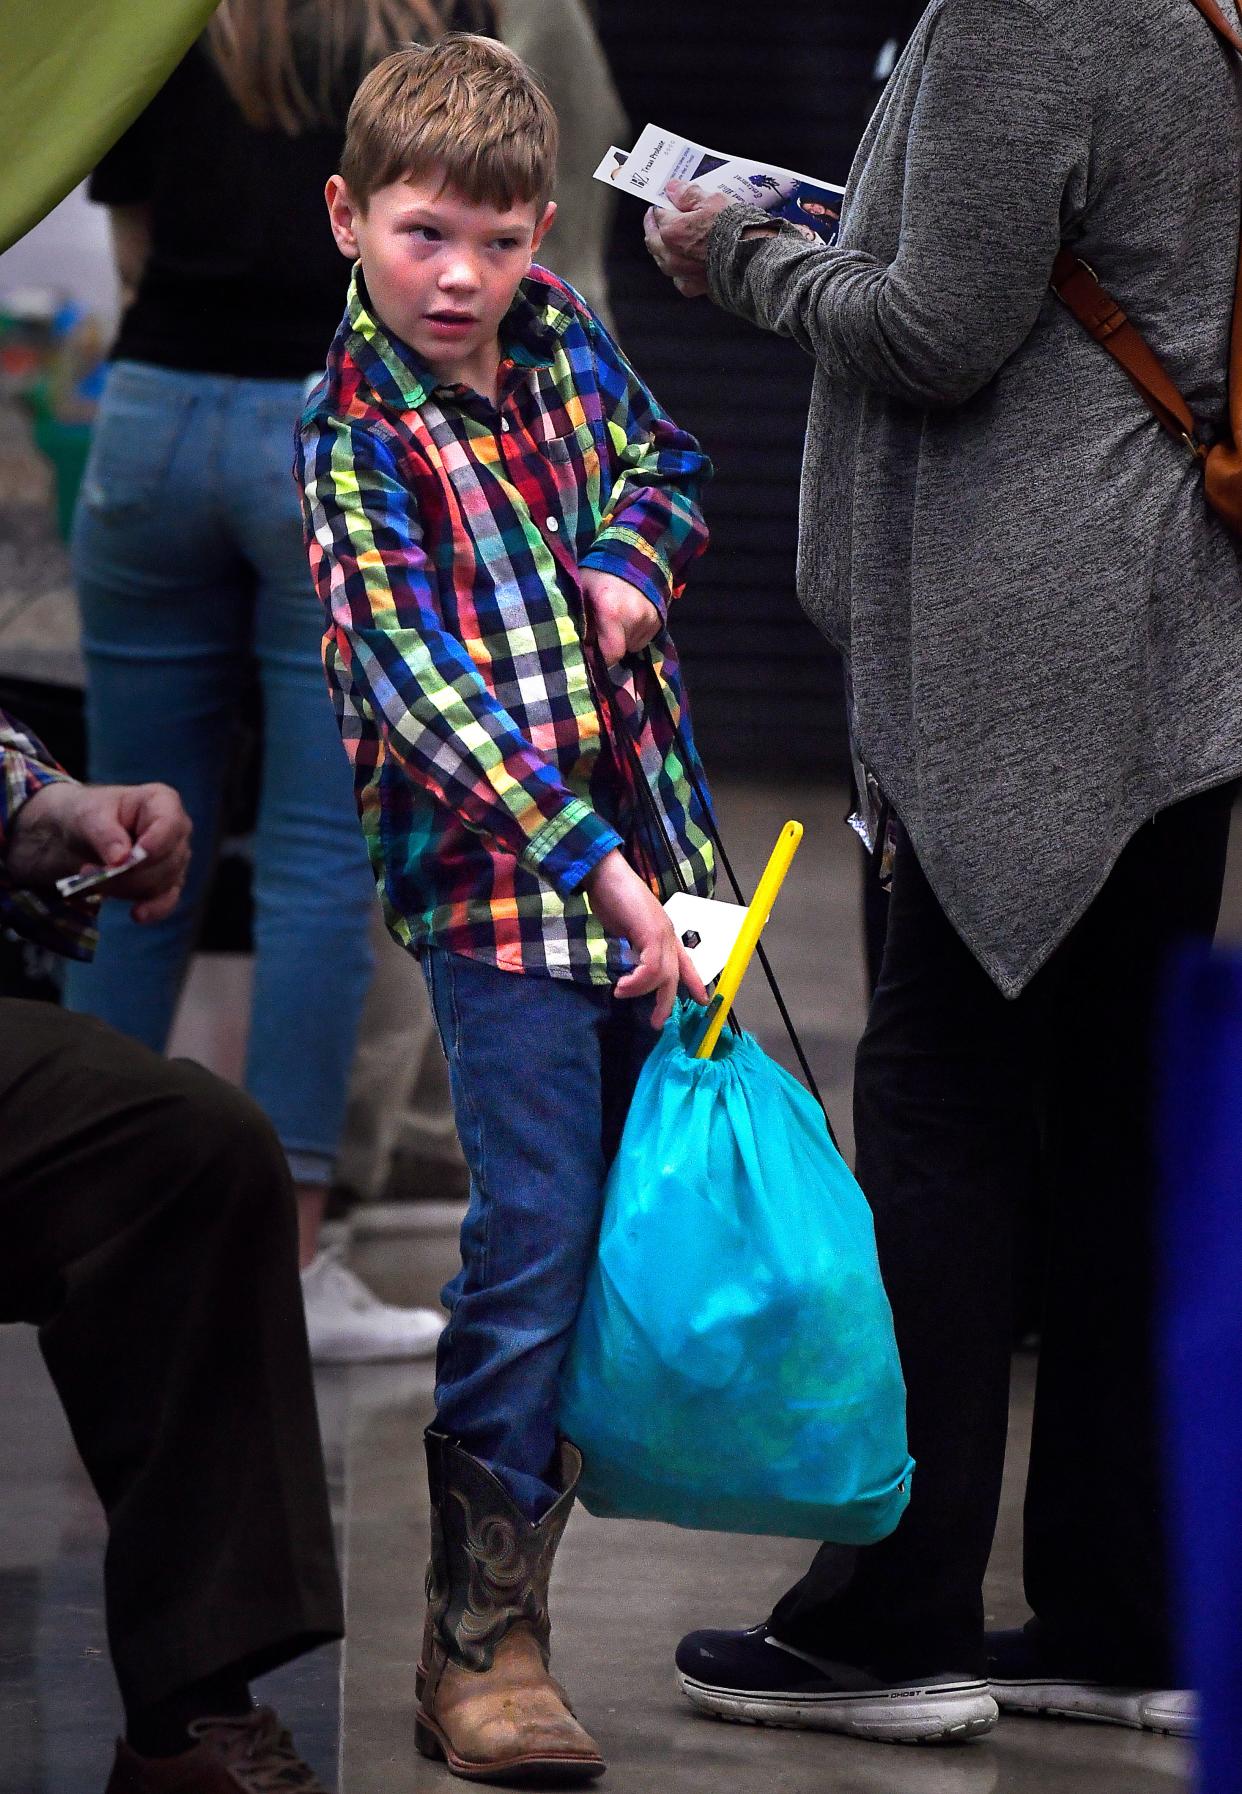 Iam Smith, 9, hefts a bag of giveaway swag as visitors crowd Business Expo Wednesday at the Abilene Convention Center.